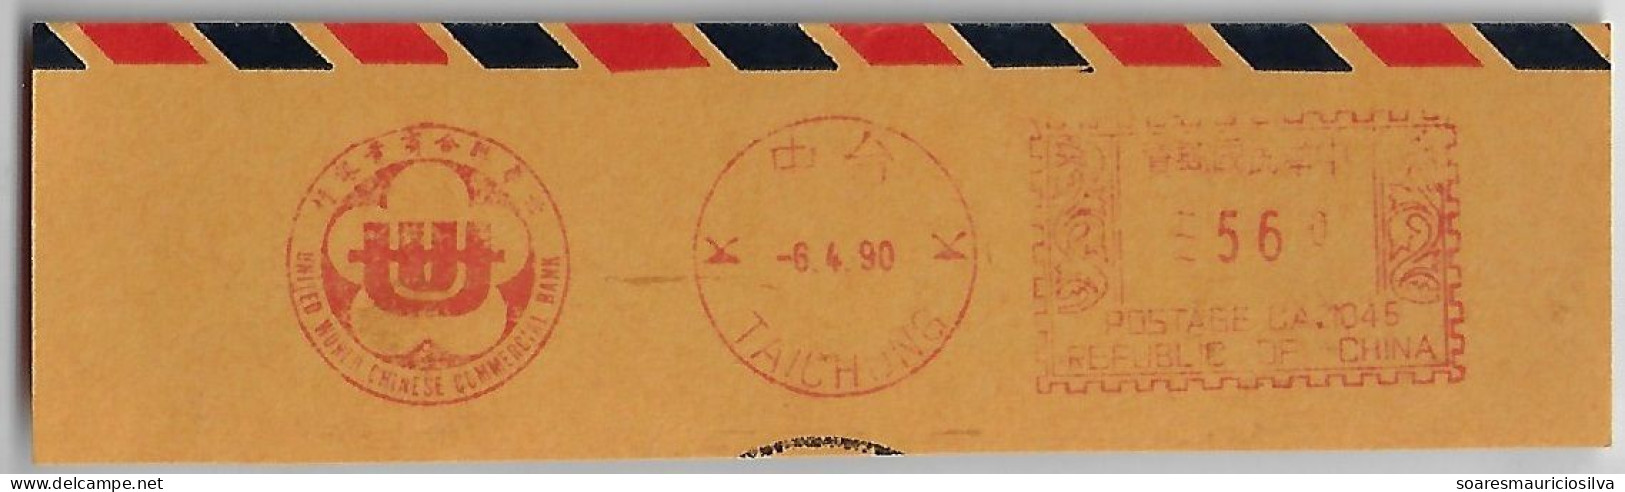 Taiwan 1990 Fragment Meter Stamp Pitney Bowes Slogan United World Chinese Commercial Bank Taichung Flower Plum Blossom - Cartas & Documentos